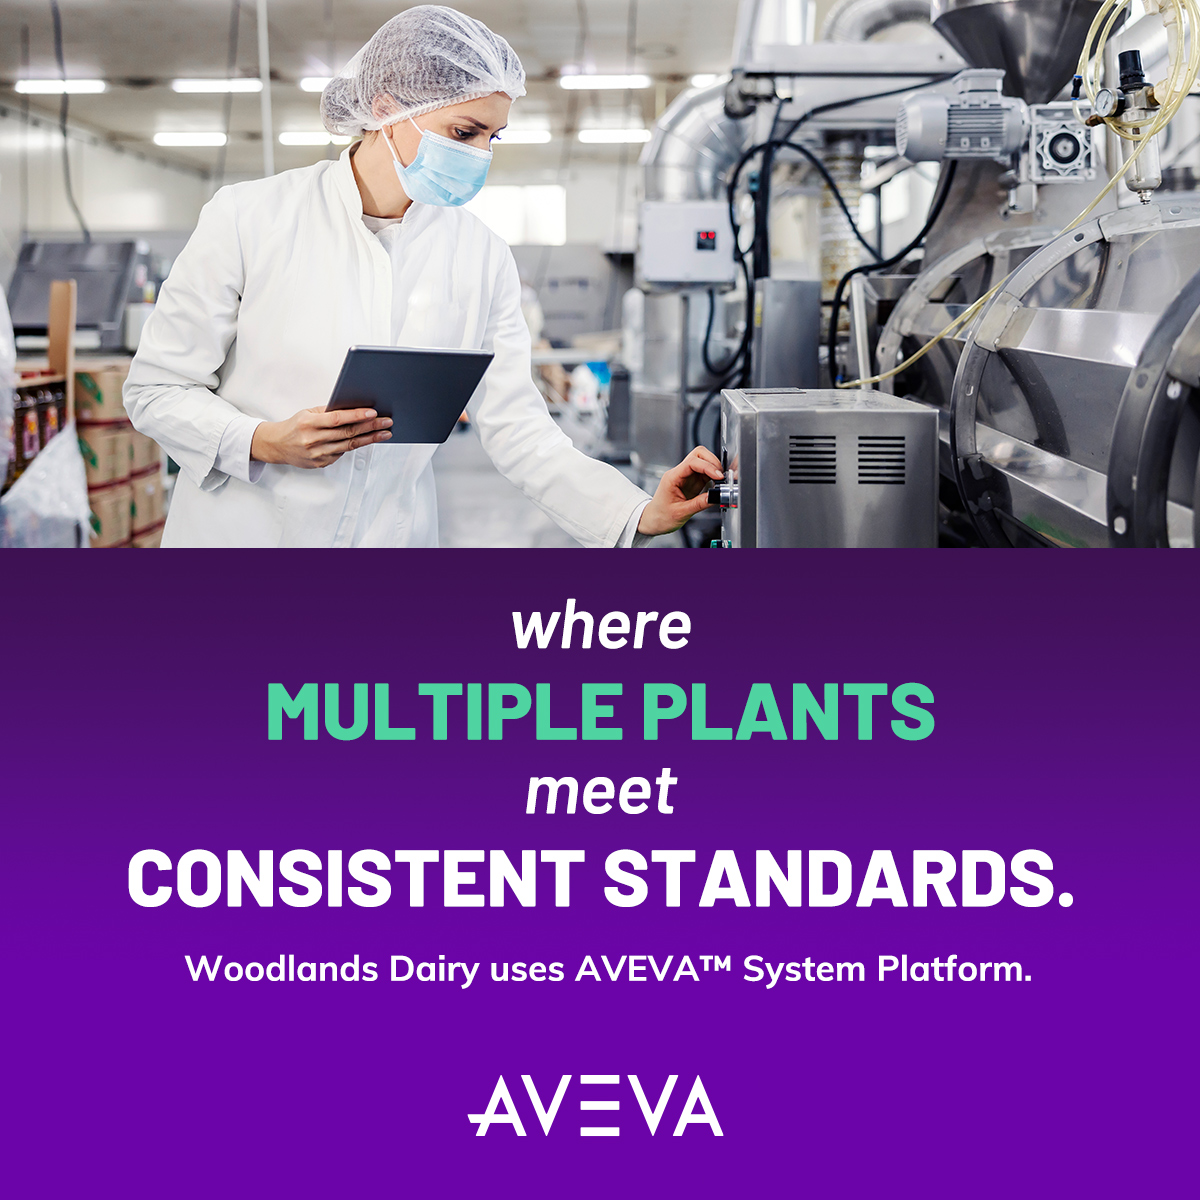 Where one system meets multiple plants.
Woodlands Dairy applies consistent quality standards across its plants with AVEVA™ System Platform. Learn more  bit.ly/3UxnuyY  #foodandbeverage #HMI #monitoringandcontrol #data